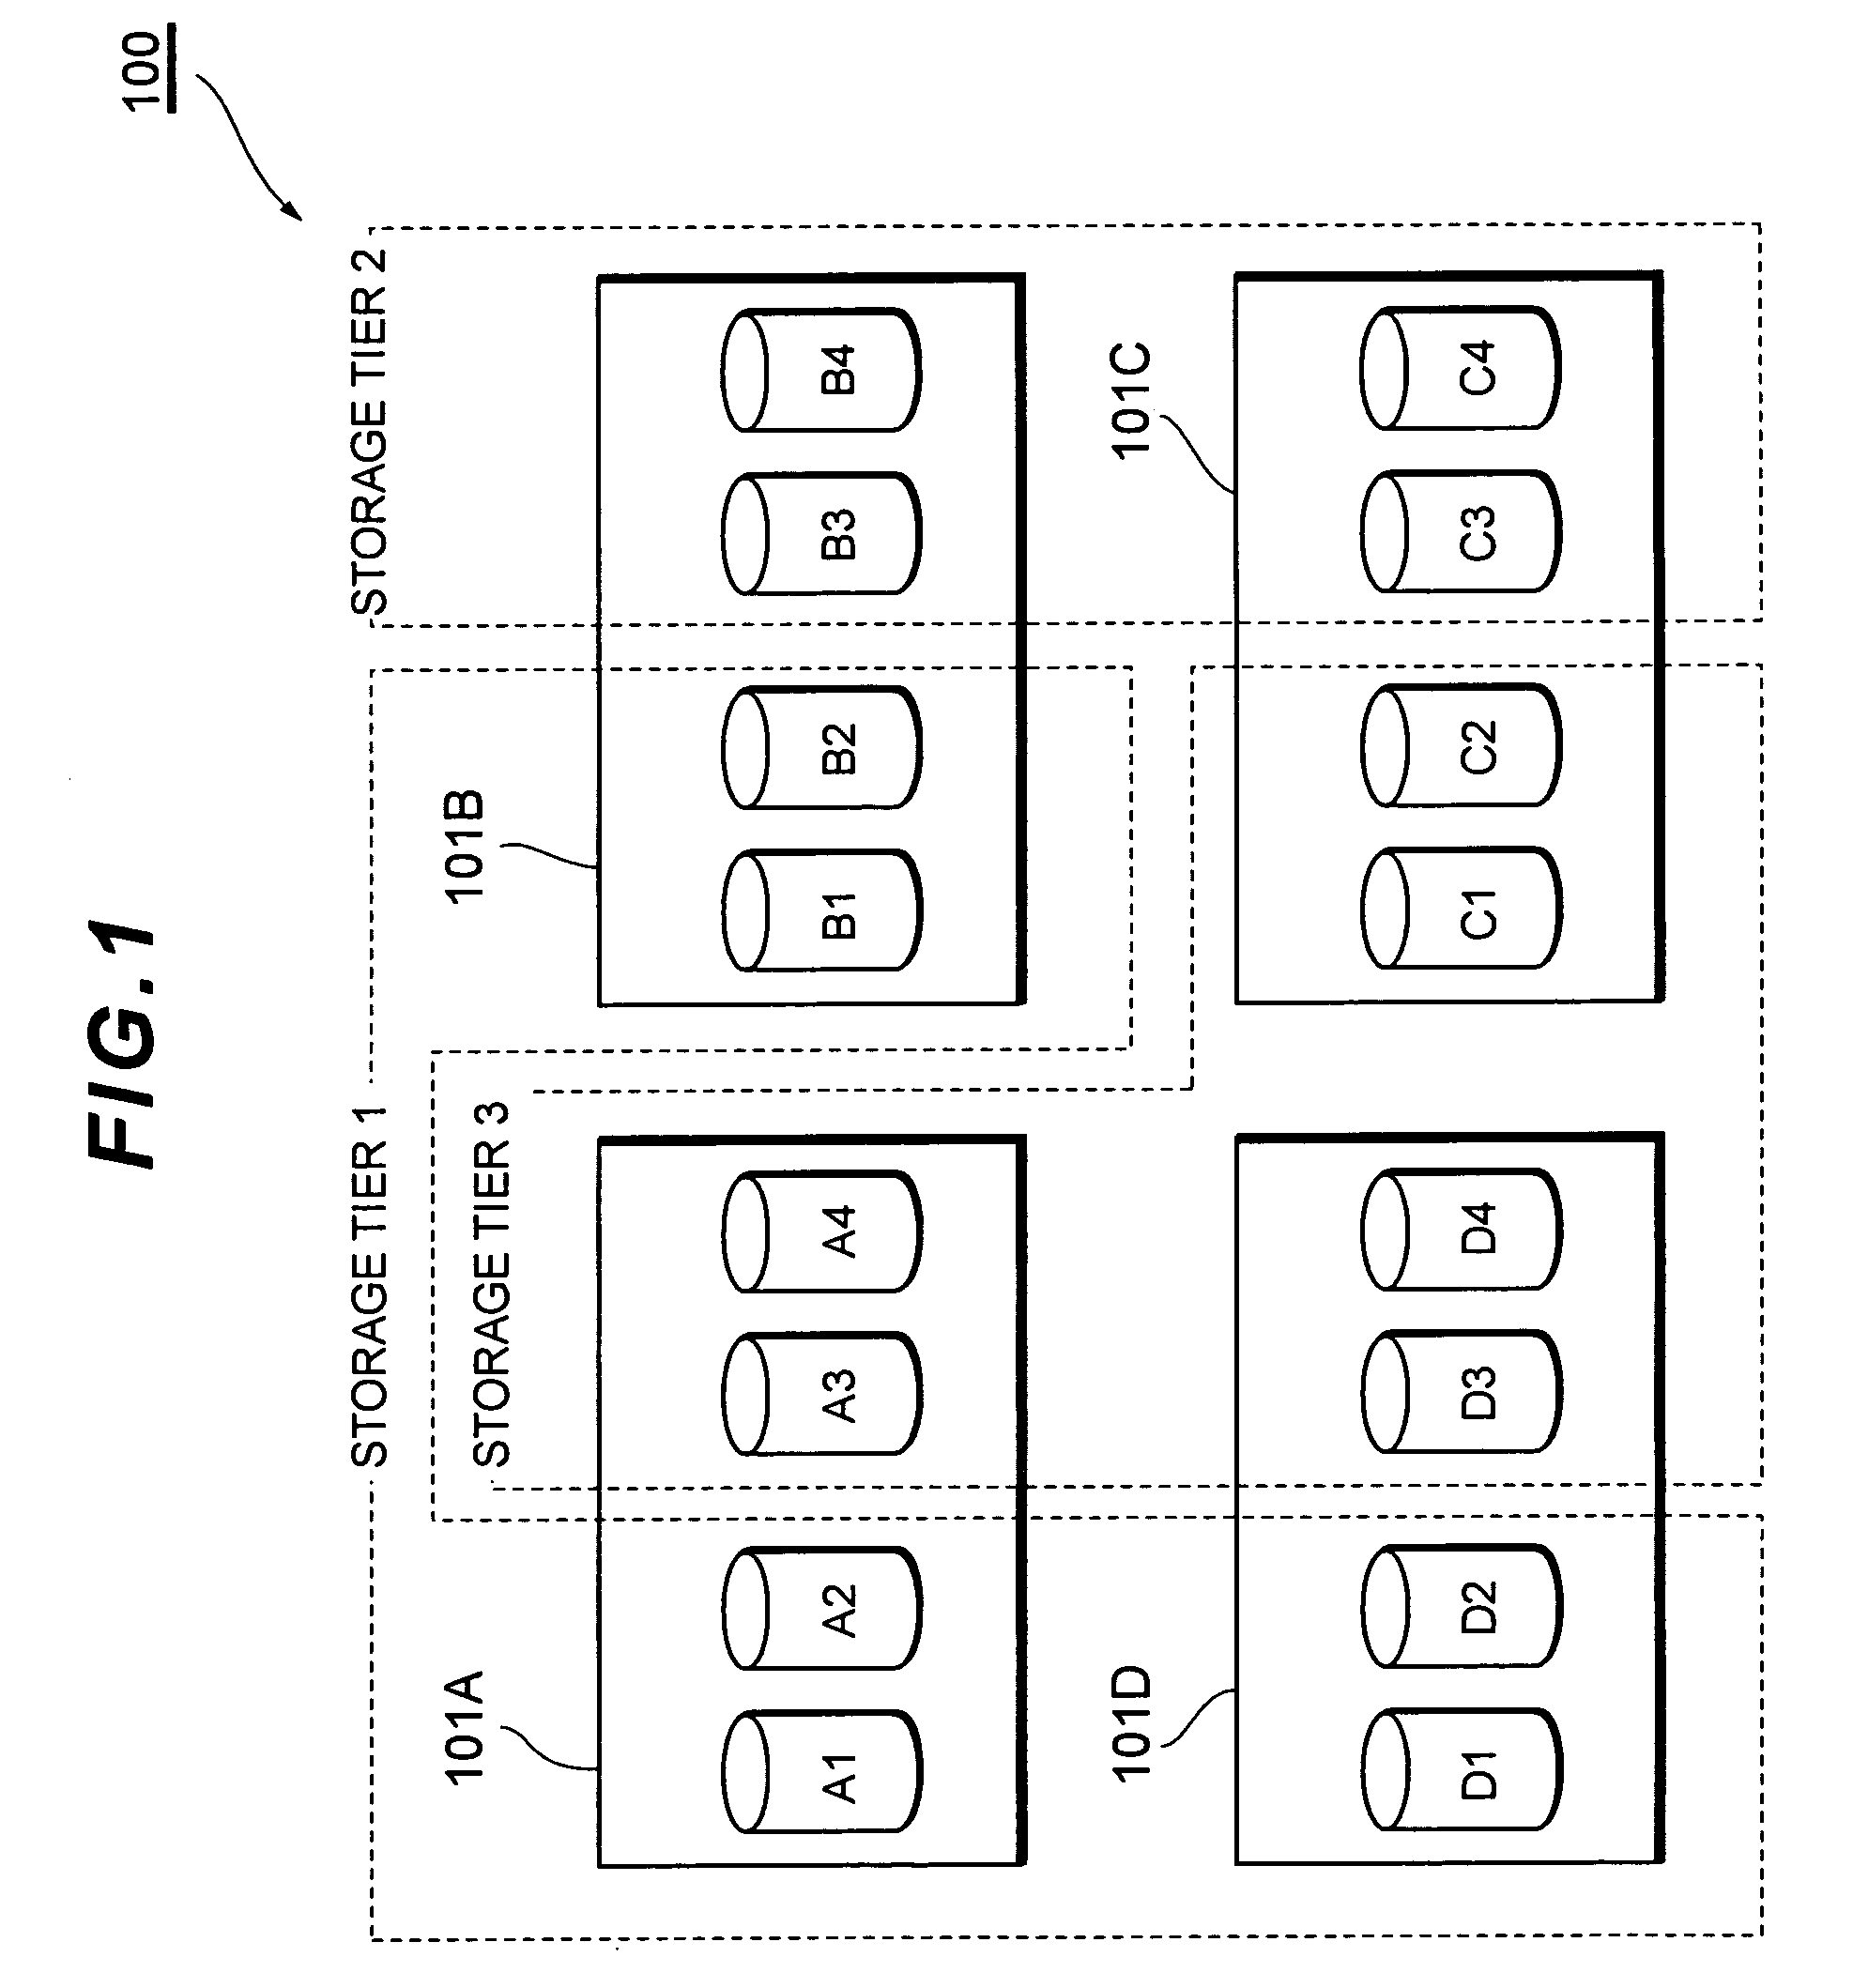 Storage system with virtual allocation and virtual relocation of volumes